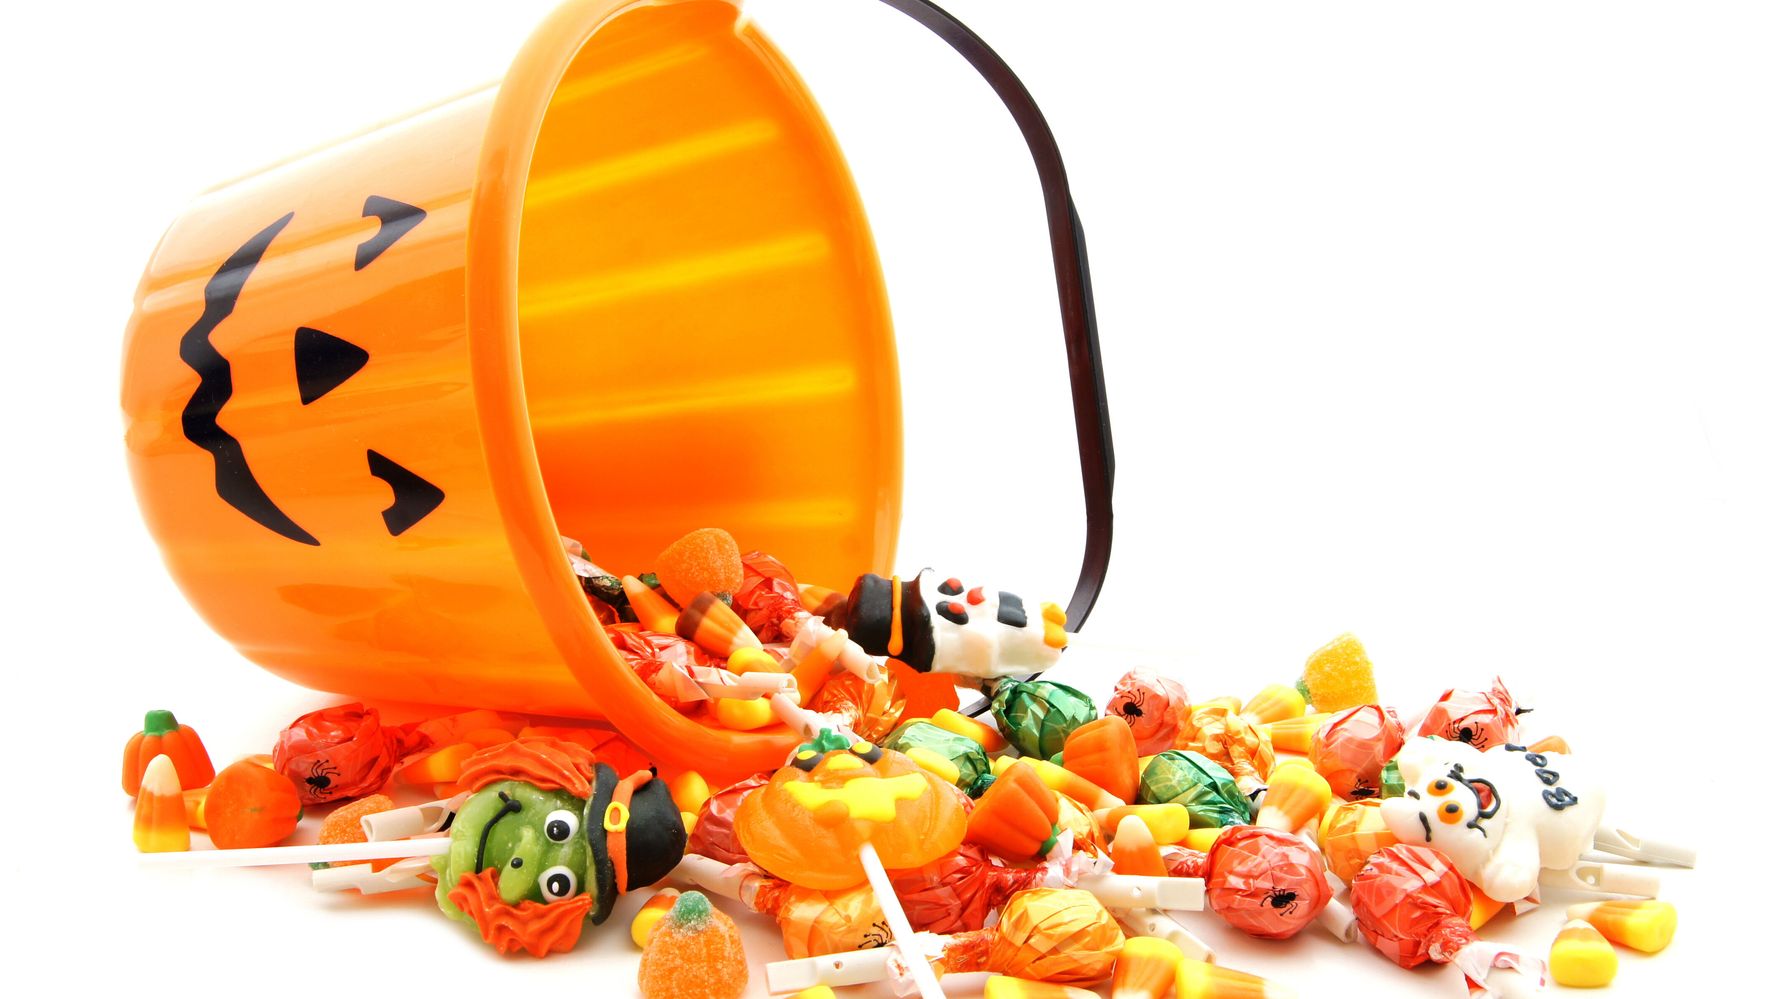 U.s. Halloween Candy Sales Are Up In 2020, Trick-or-treat Or Not photo